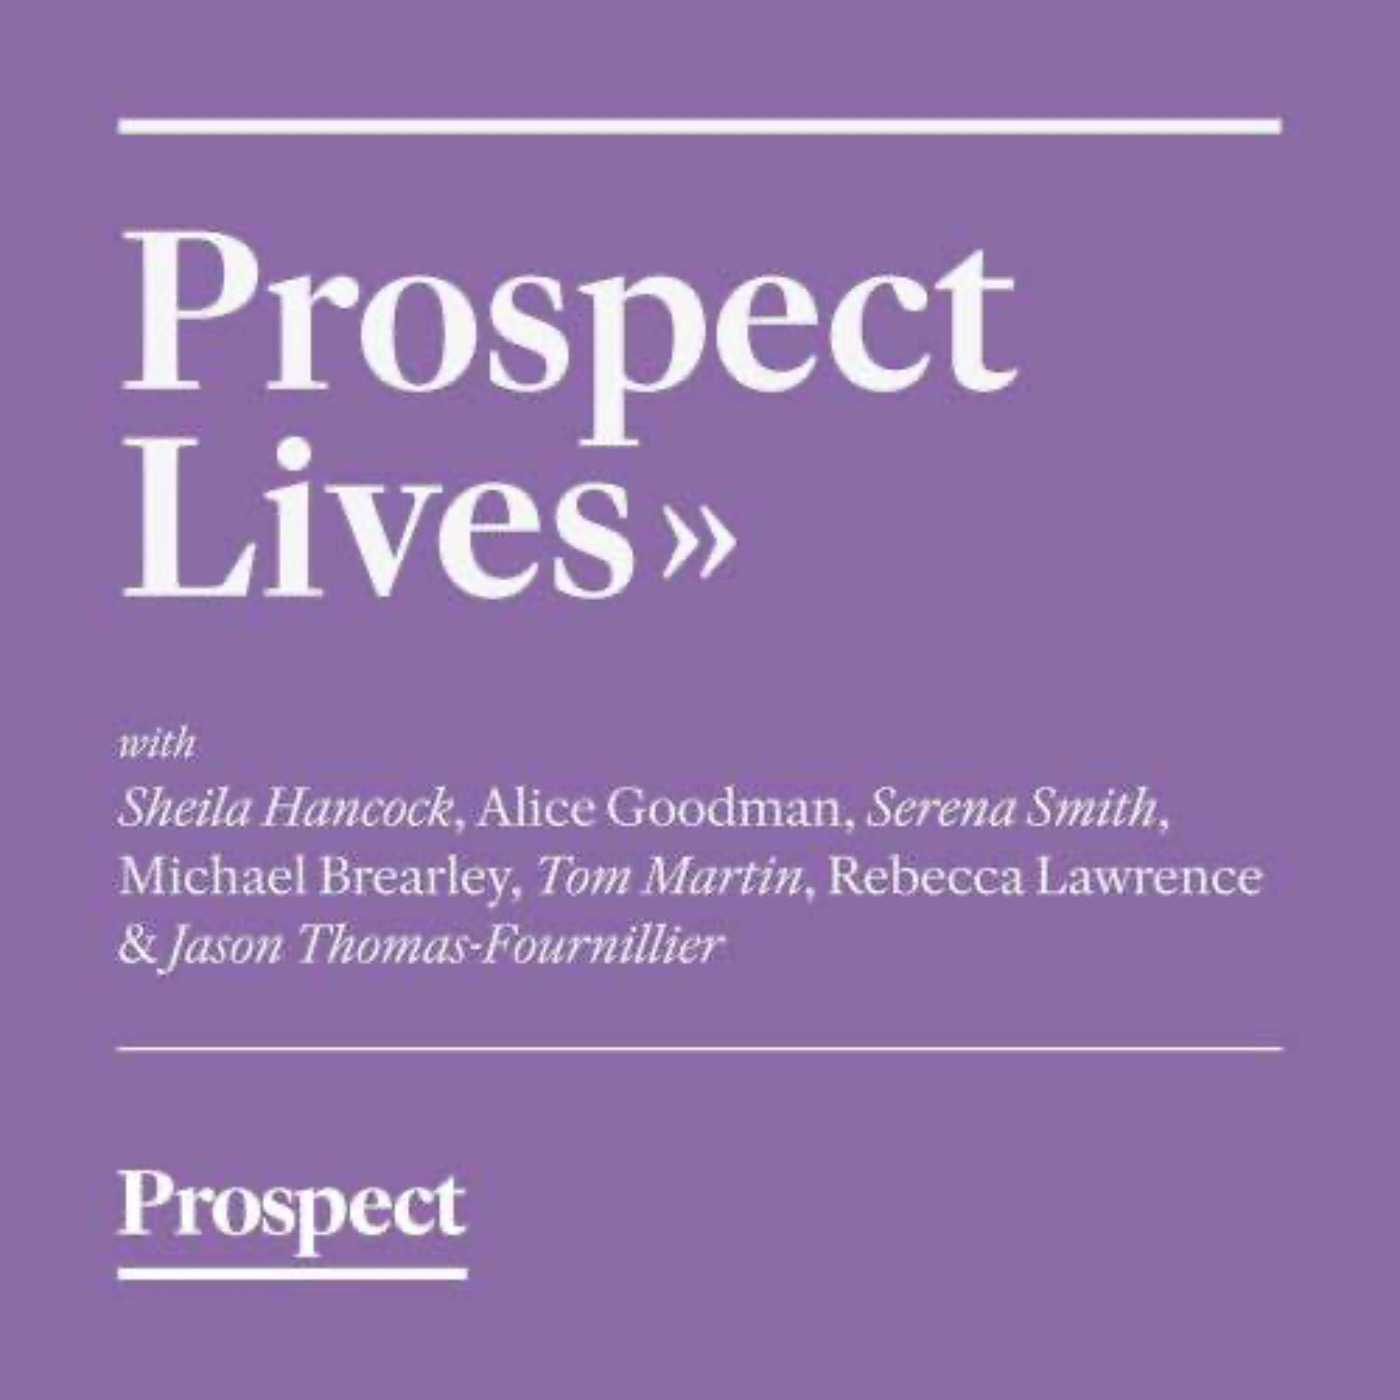 Prospect Lives: Looking forward and reflecting back